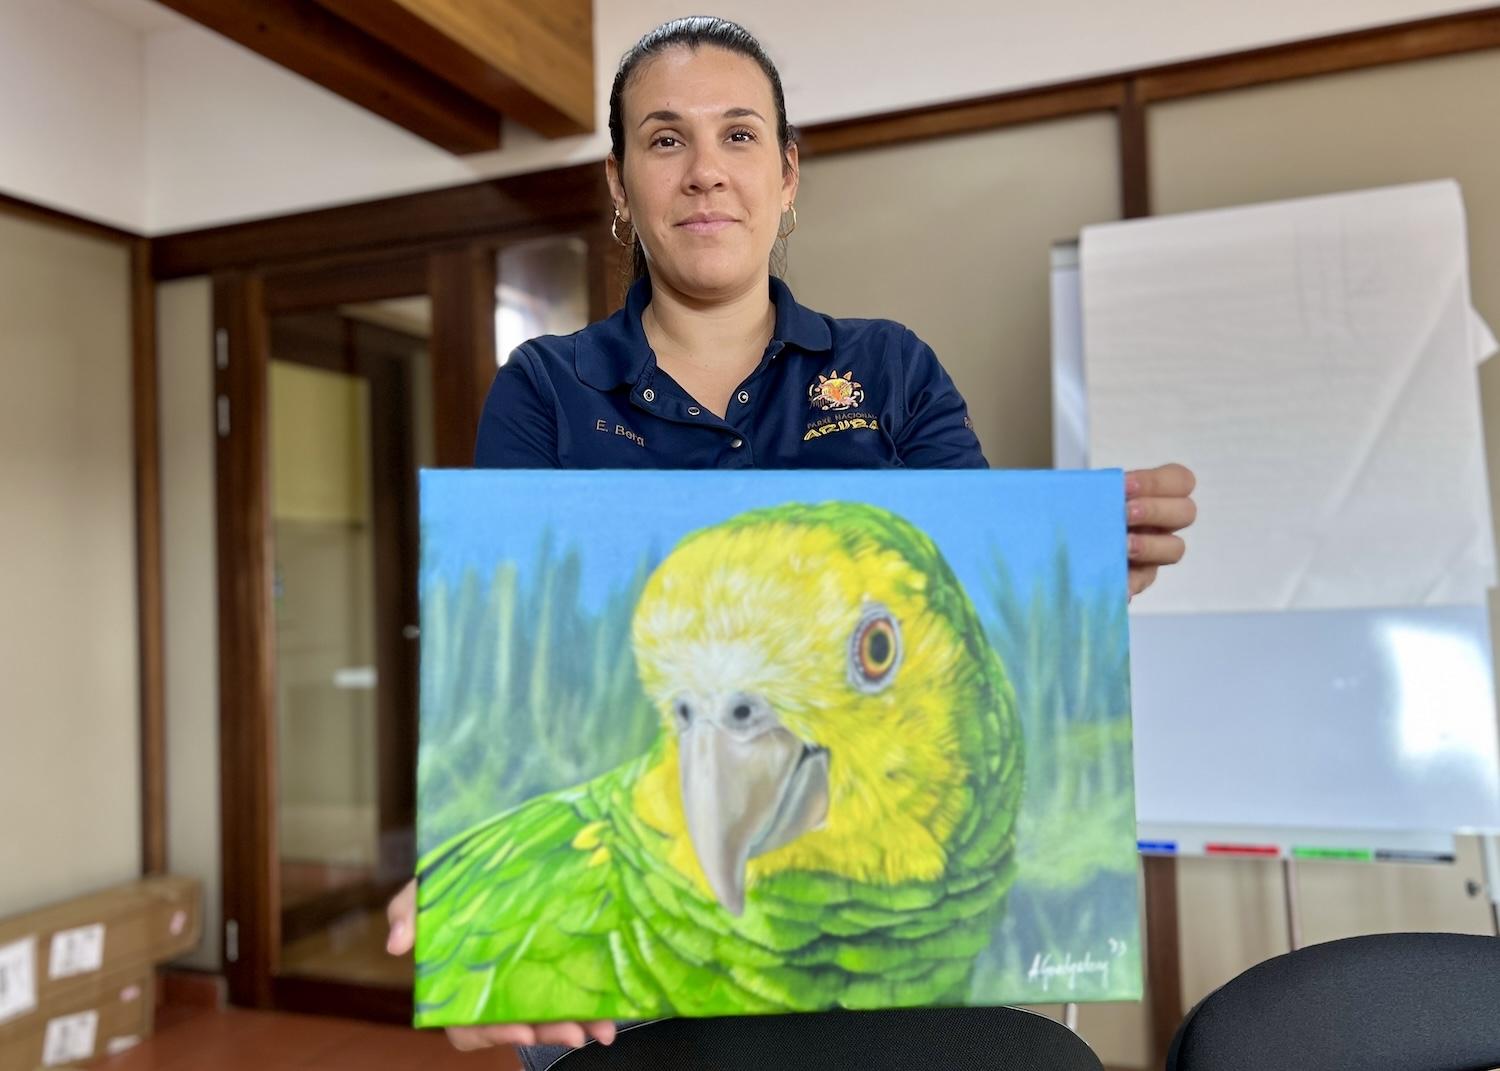 At the Aruba National Park Foundation office, communications and marketing manager shows off a Lora painting by local artist Armando Goedgedrag.